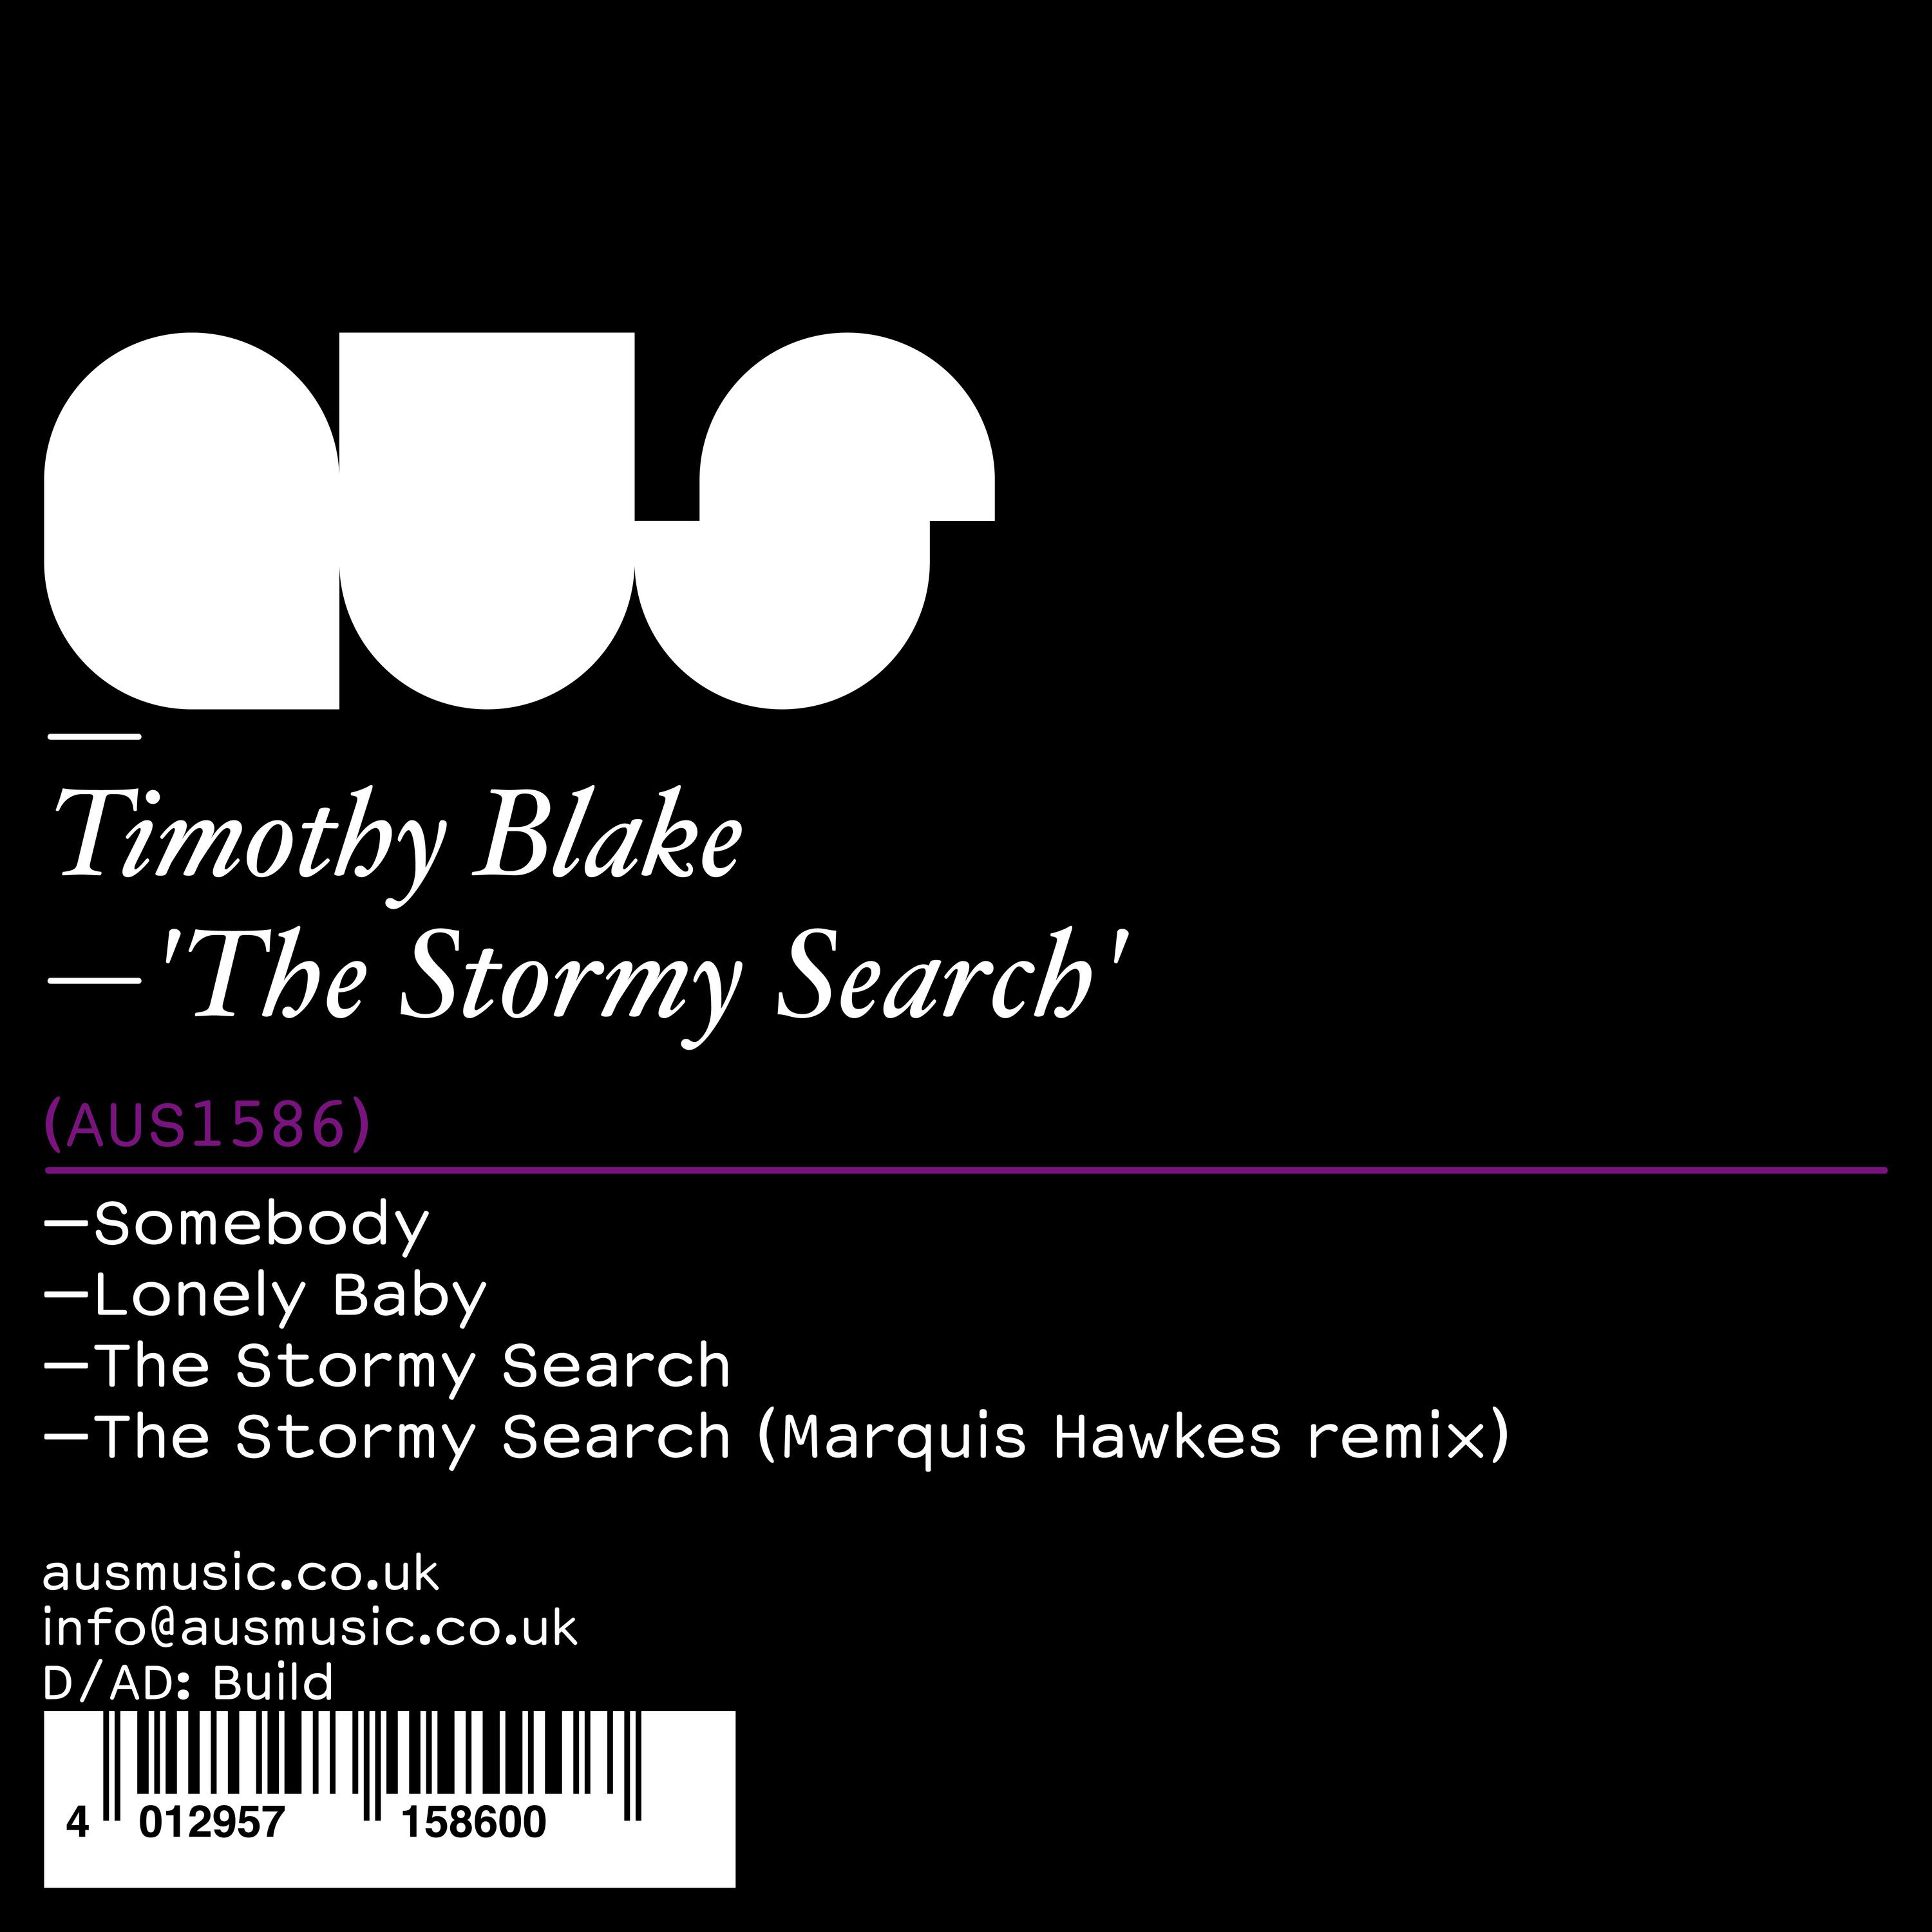 The Stormy Search